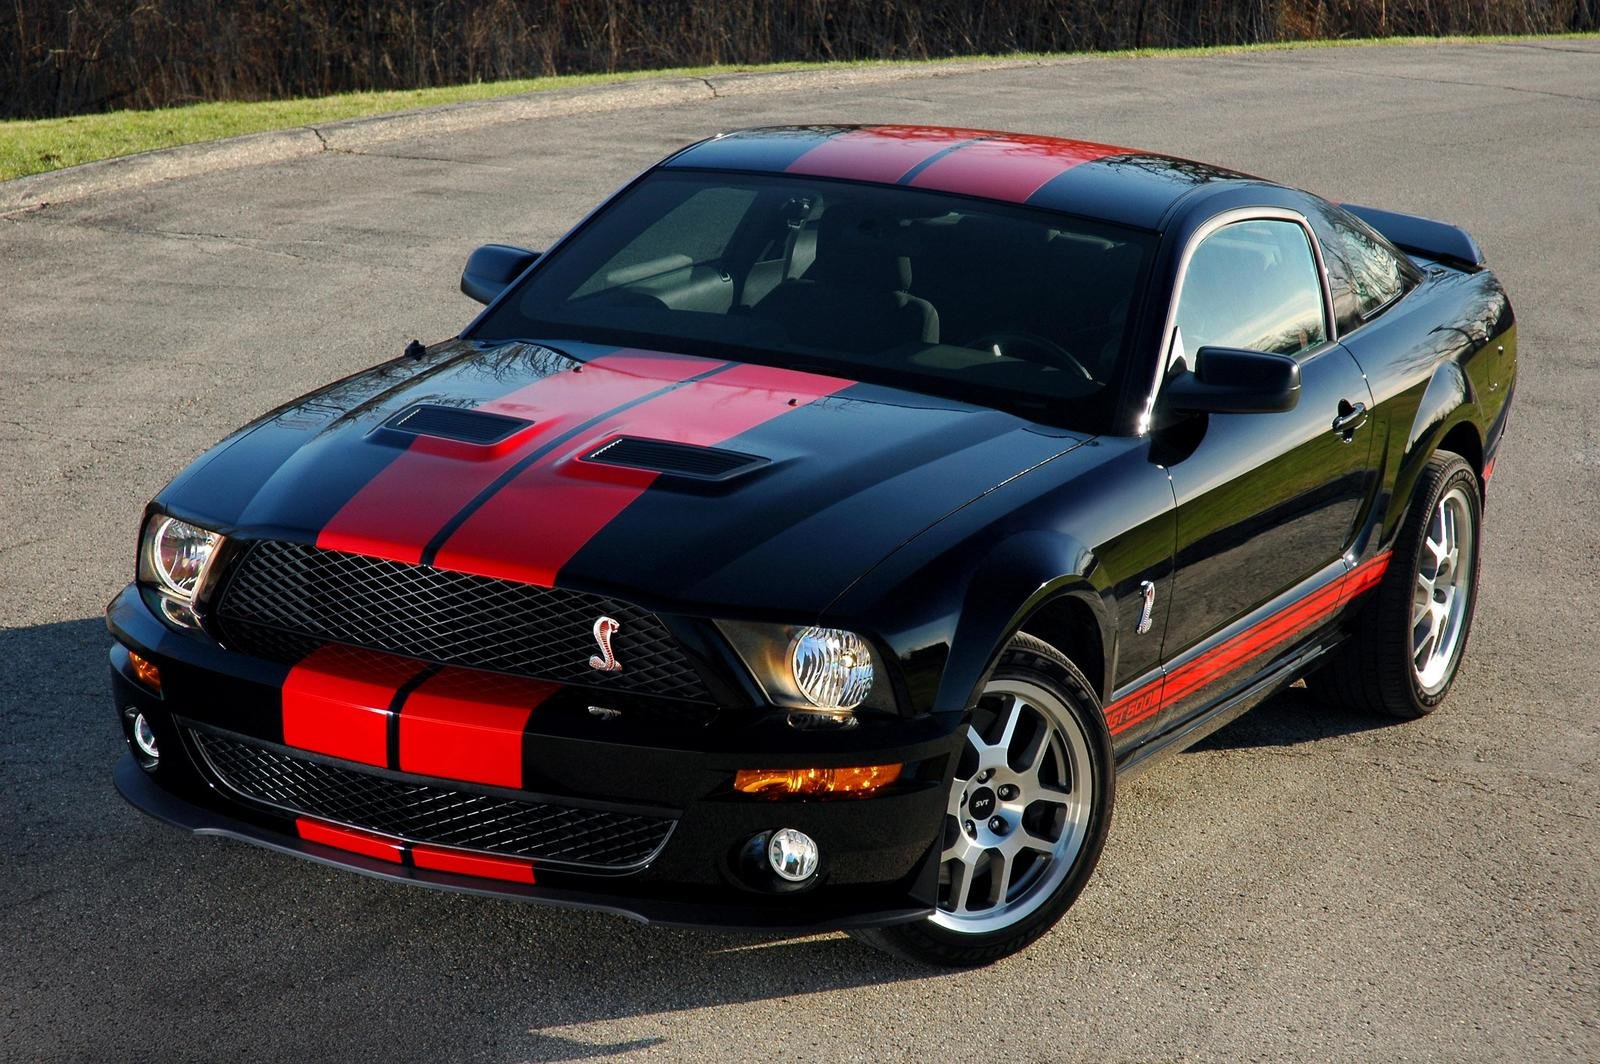 Black and red 2007 Ford Mustang Shelby GT500